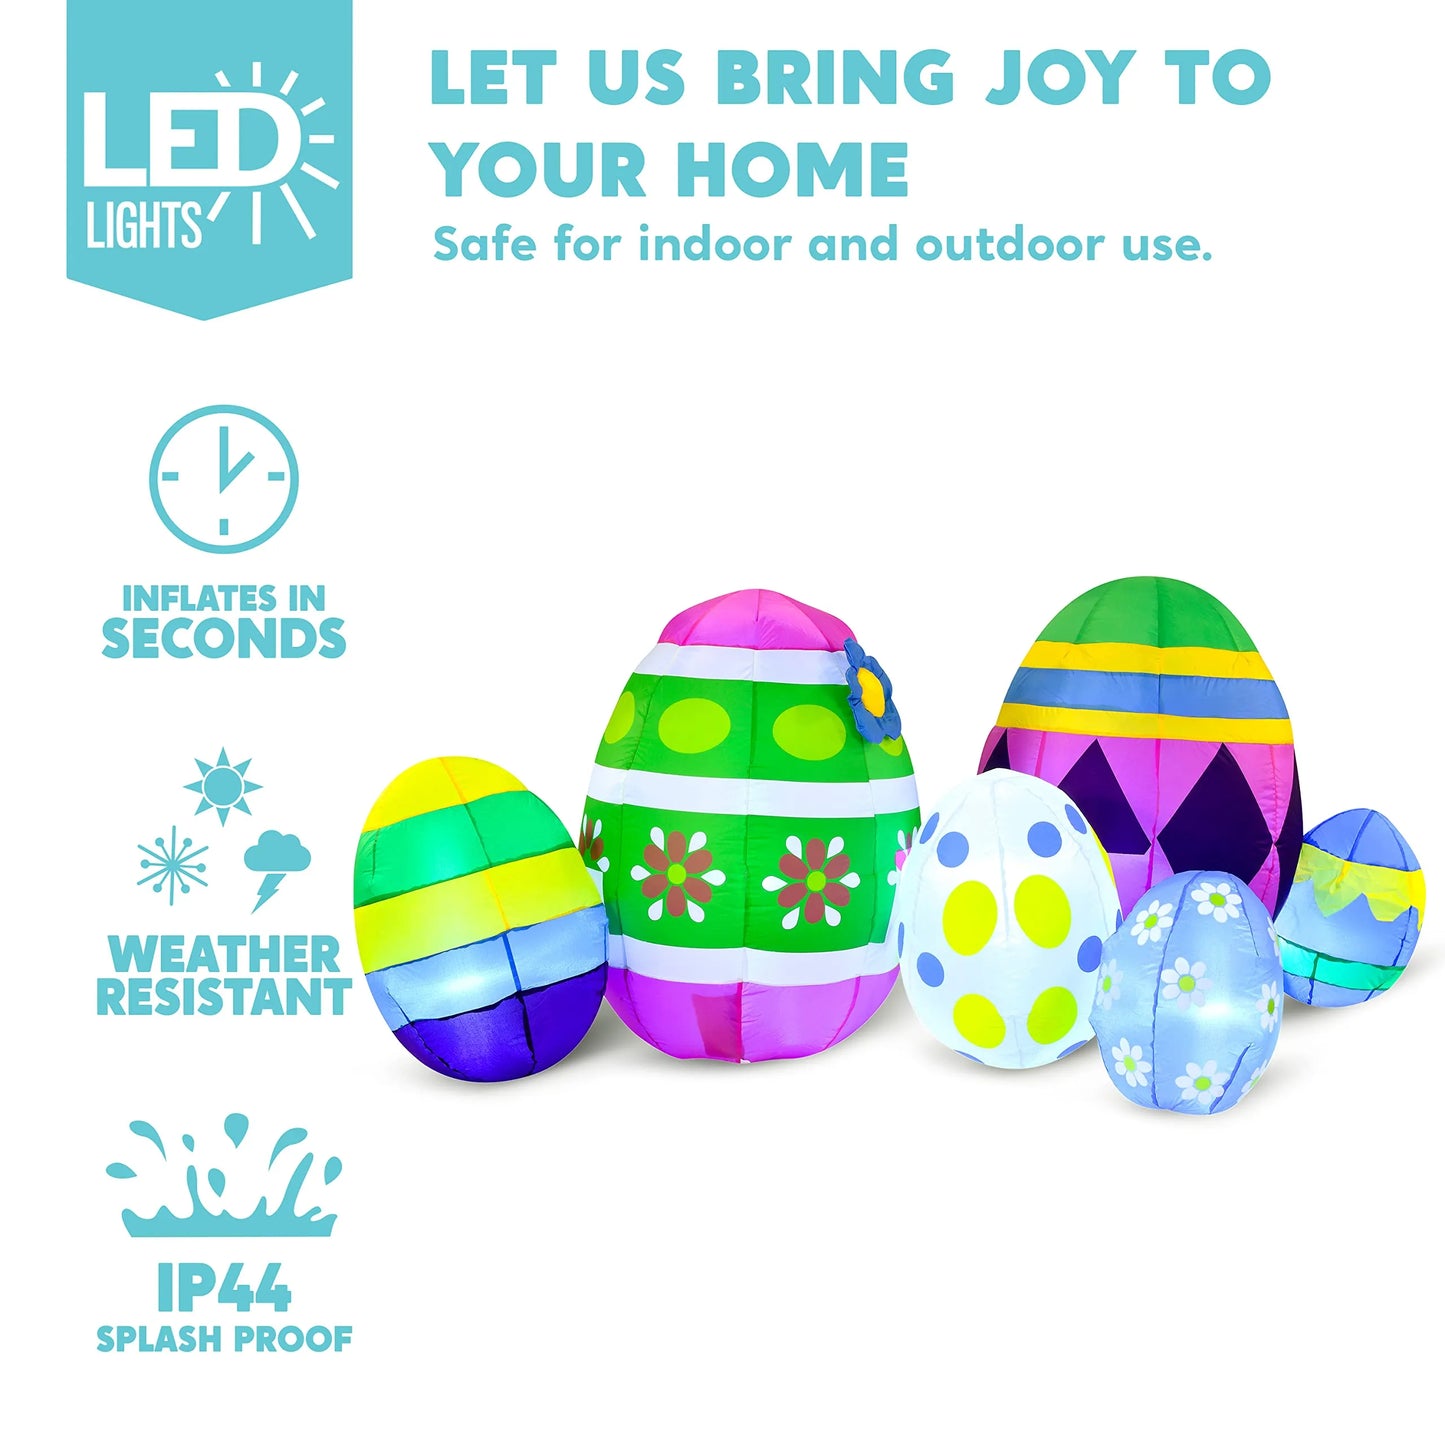 Large Easter Egg Inflatable with Build-in LEDs Blow Inflatable Outdoor Decorations (7.5ft)